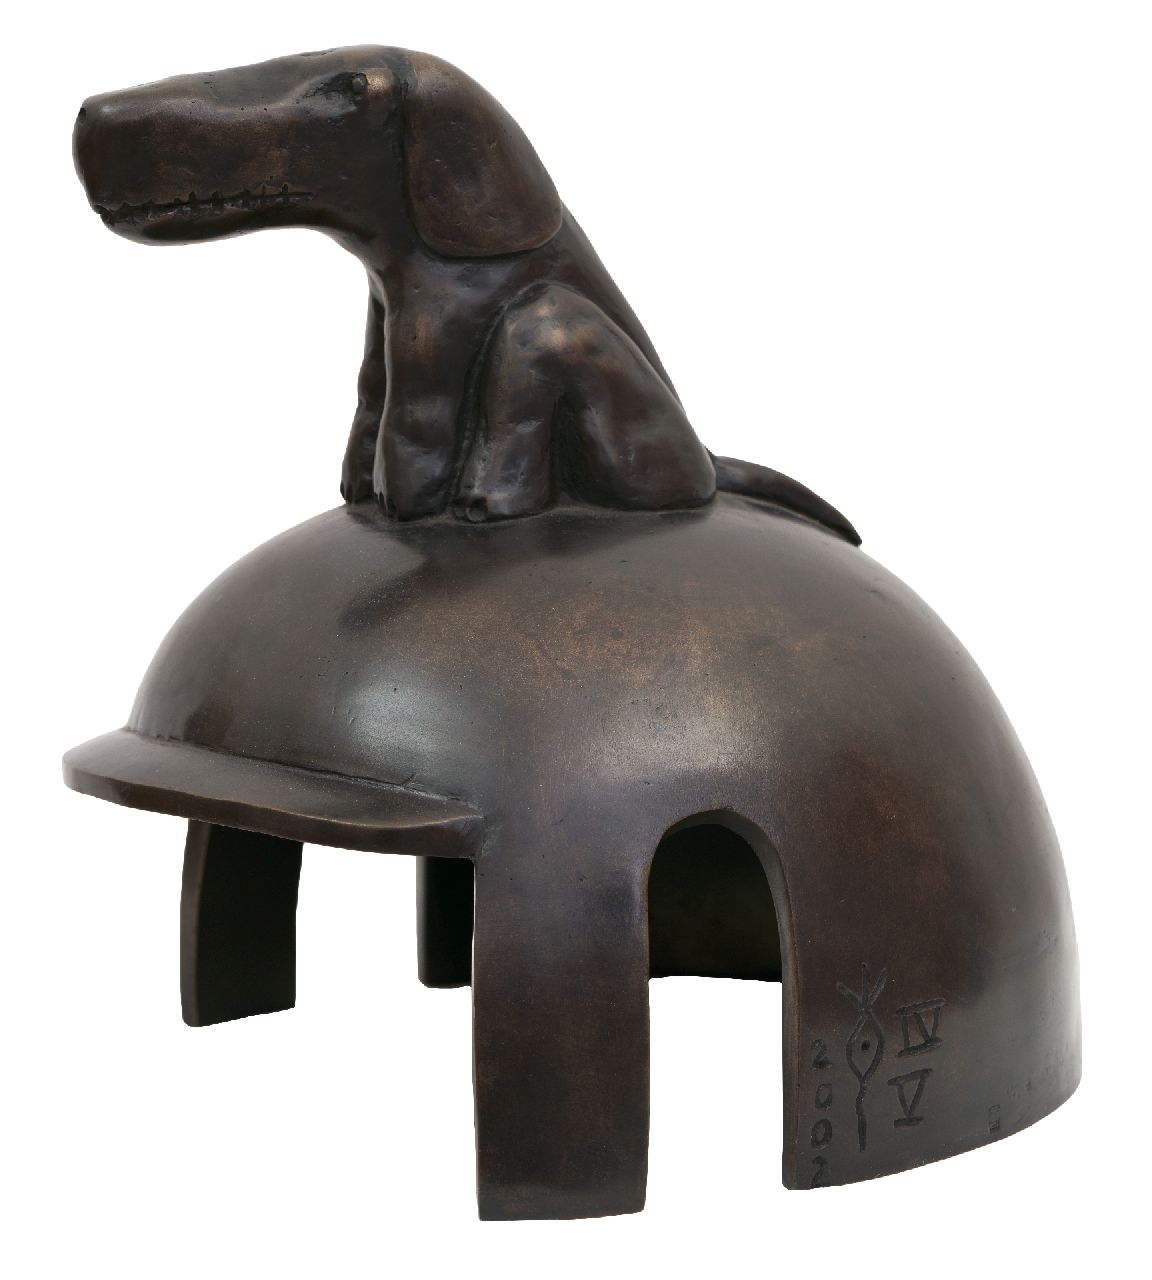 Toorn J.P. van den | Jacobus Petrus 'Joost' van den Toorn | Sculptures and objects offered for sale | Dog Helmet, bronze 25.0 x 23.0 cm, signed with monogram on the side and dated 2002 on the side